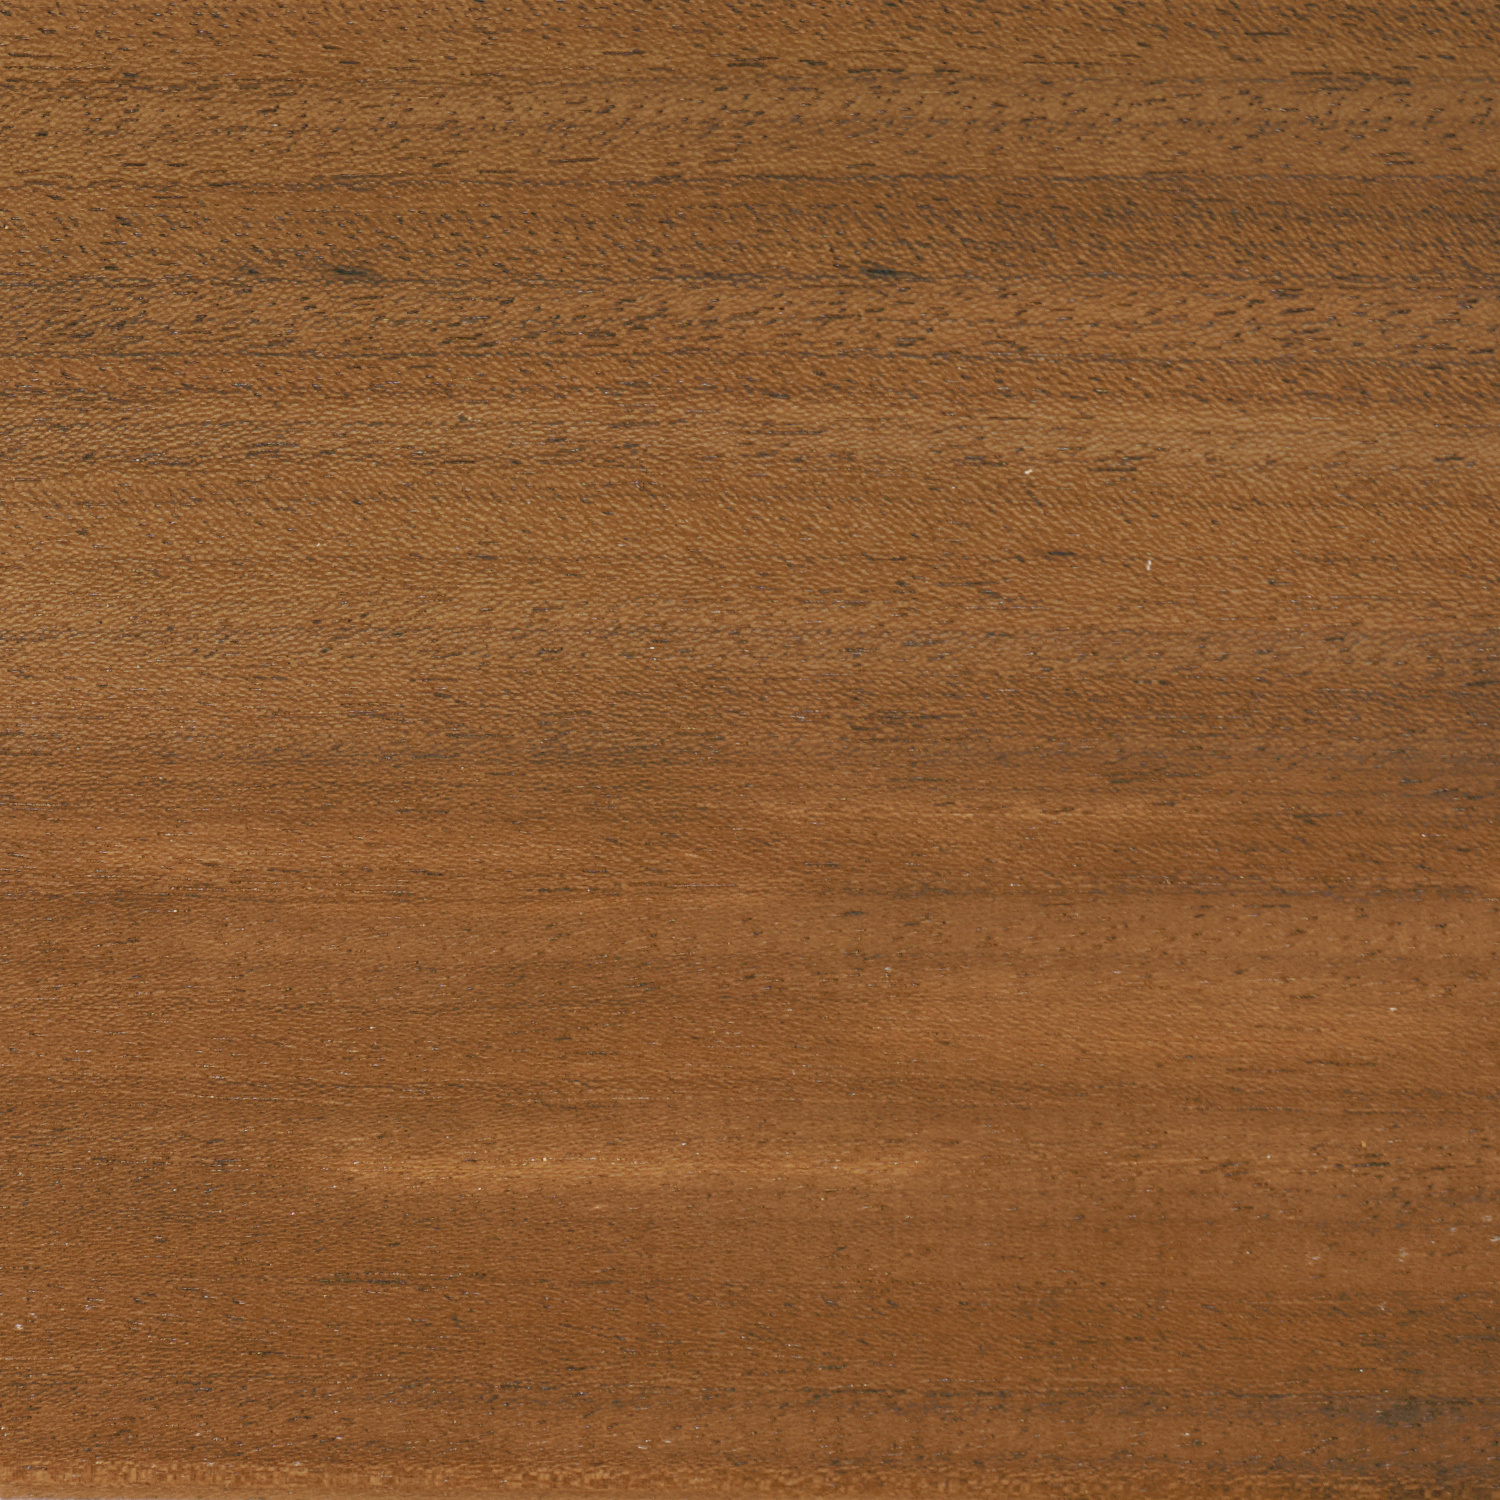  Thermowood Ayous plank 21x143 mm - geschaafd - kunstmatig gedroogd (kd 8-12%) - thermisch gemodificeerd Ayous hout (thermohout)